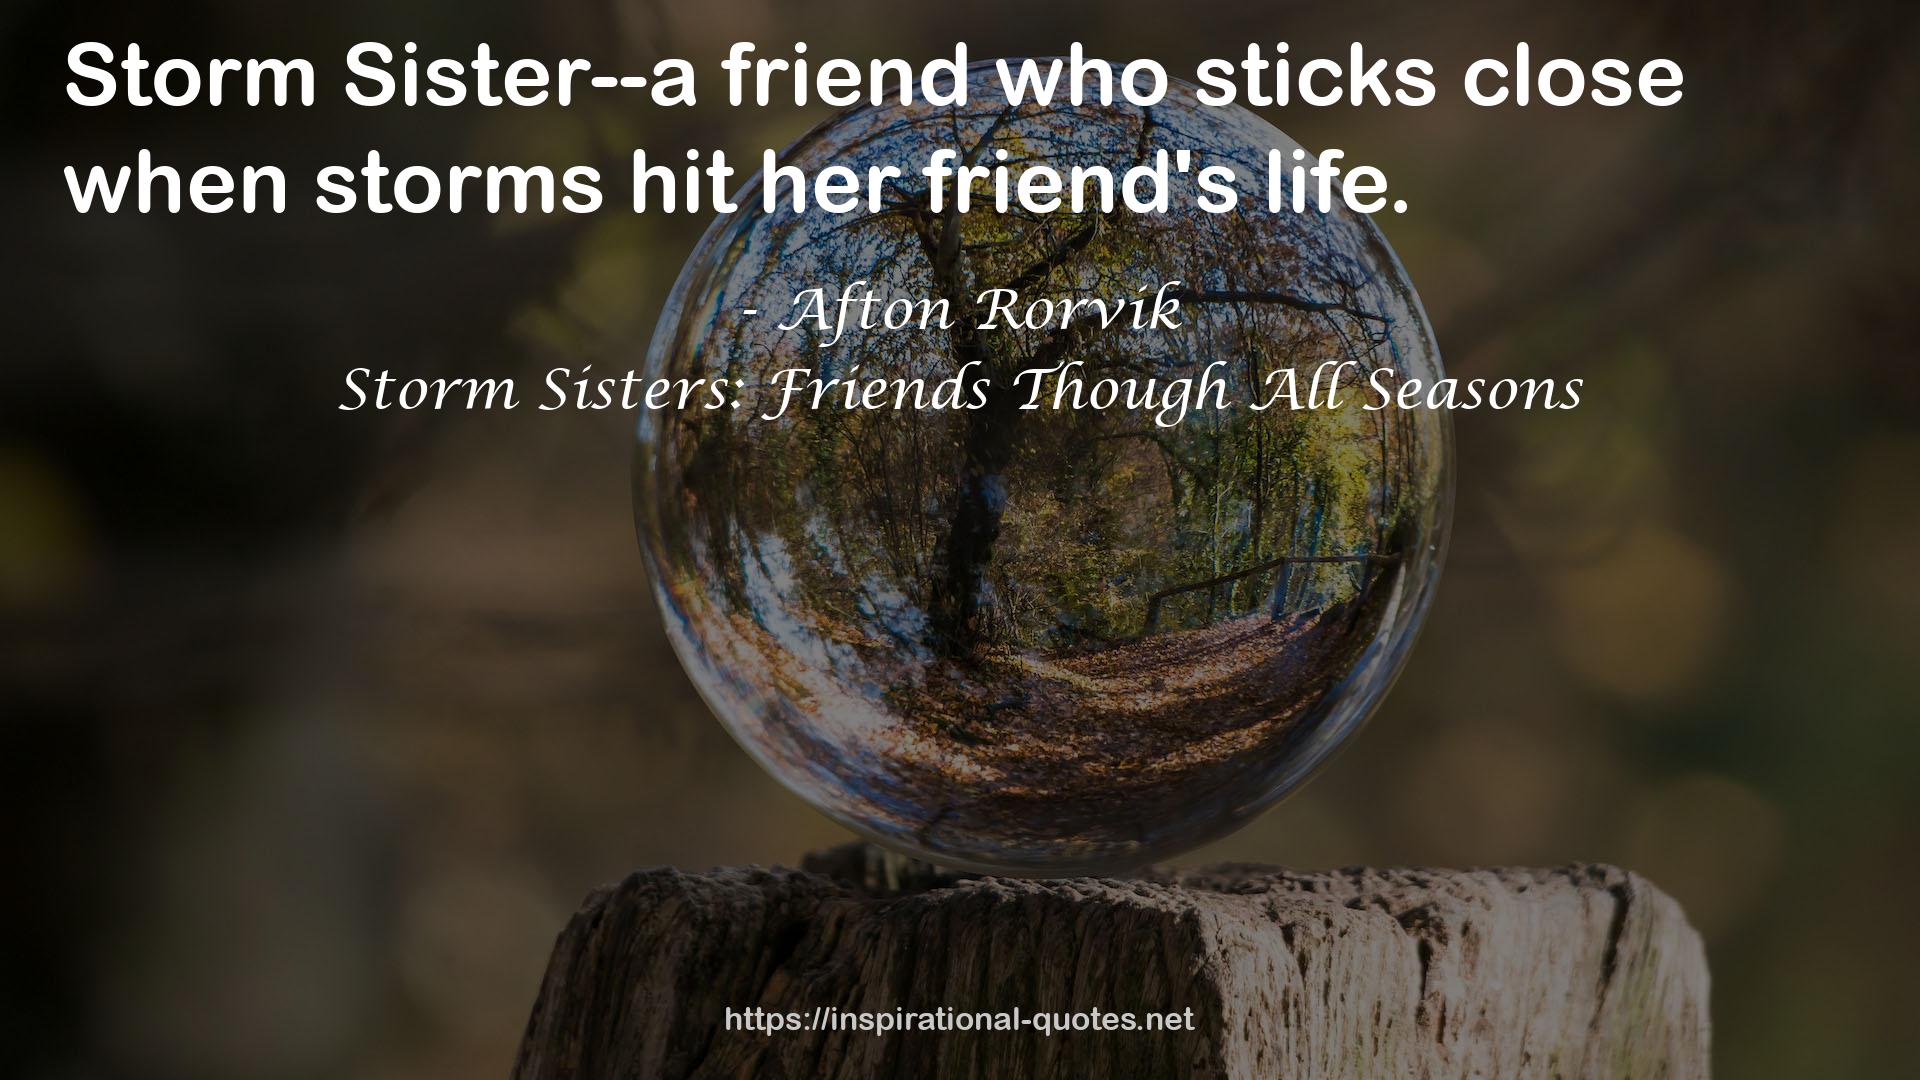 Storm Sisters: Friends Though All Seasons QUOTES